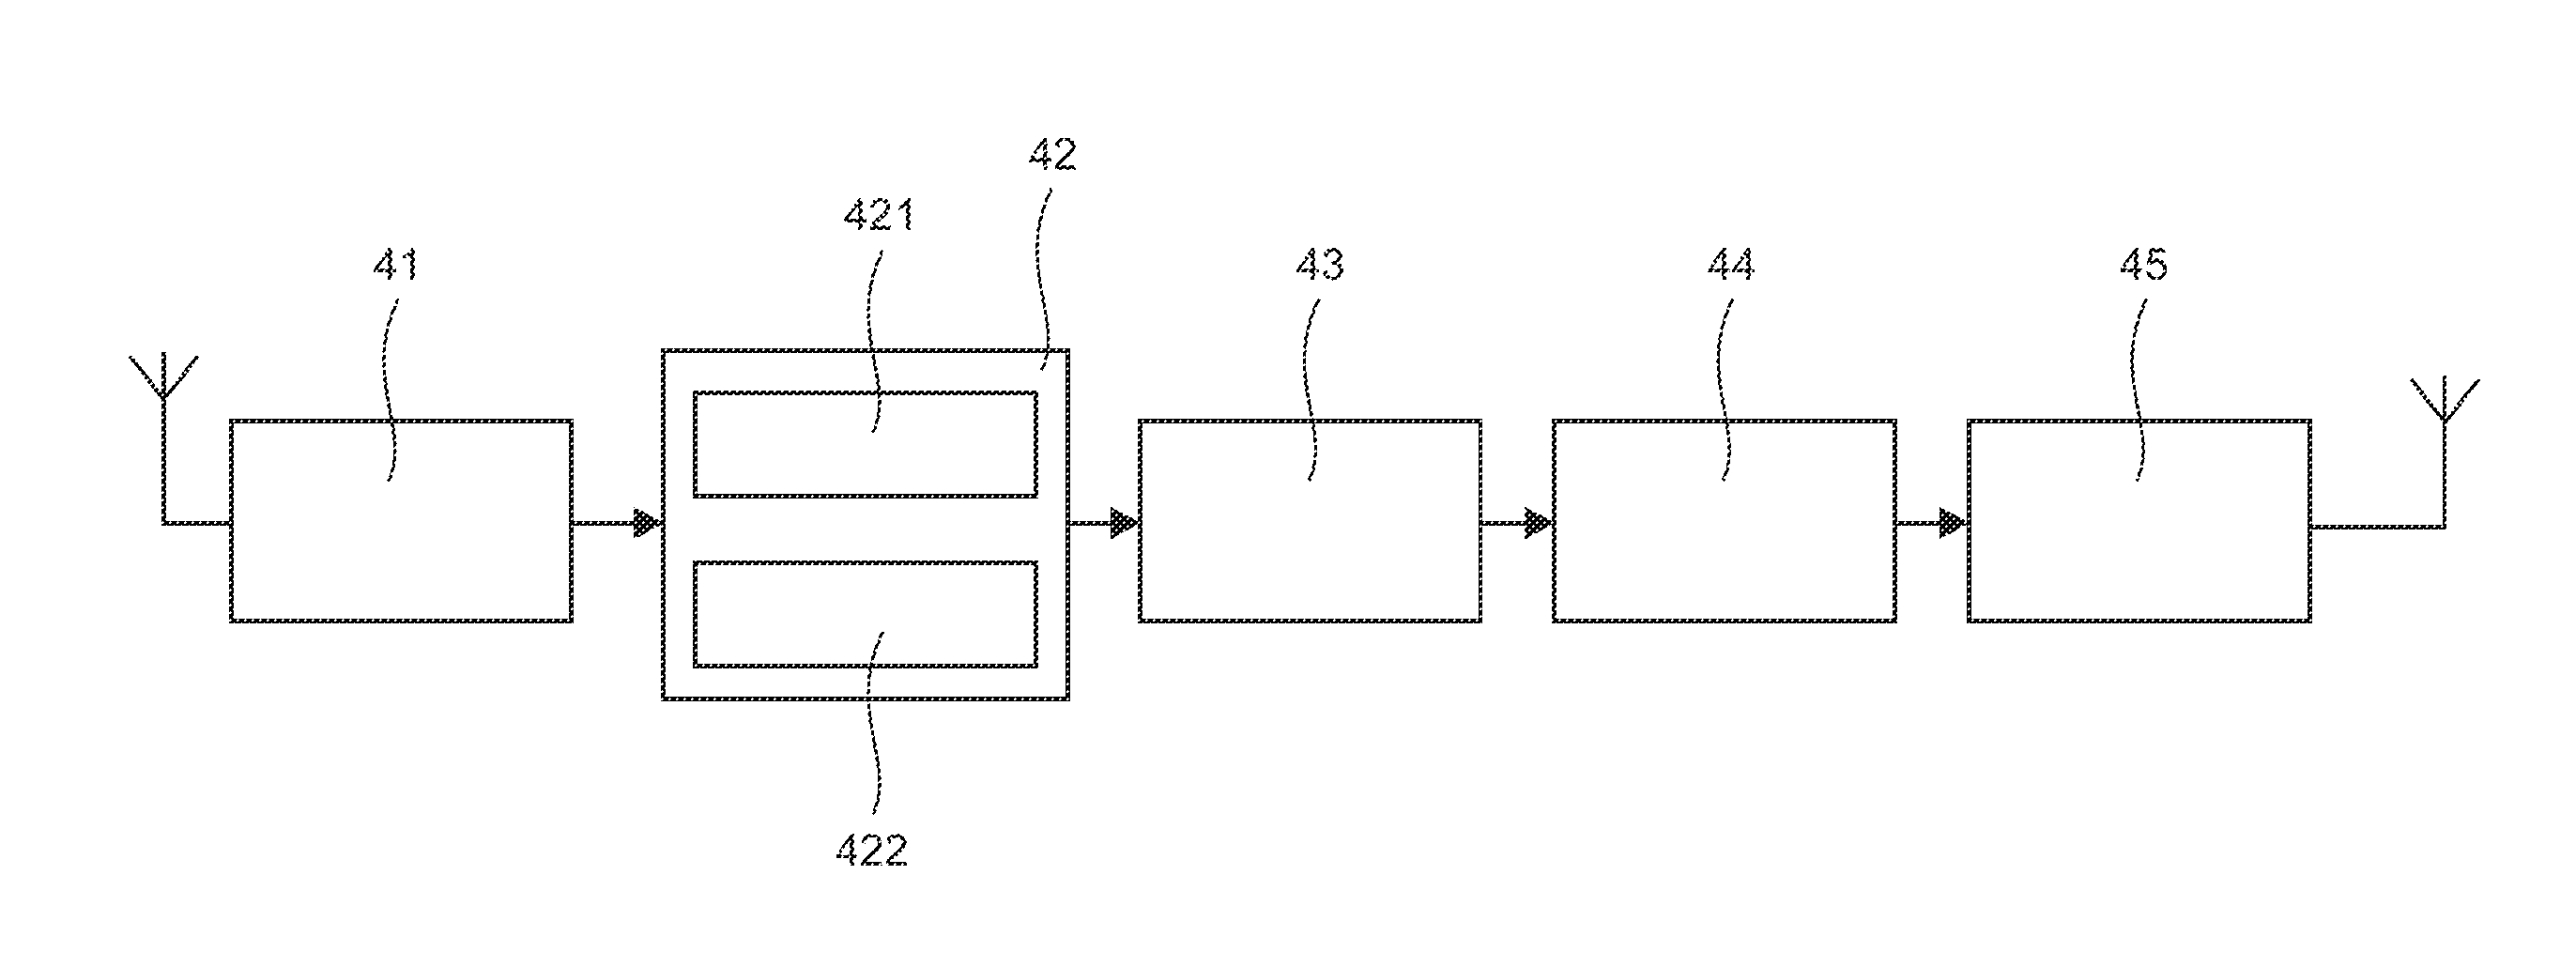 Method for transmitting a digital signal between at least two transmitters and at least one receiver, using at least one relay, and corresponding program product and relay device